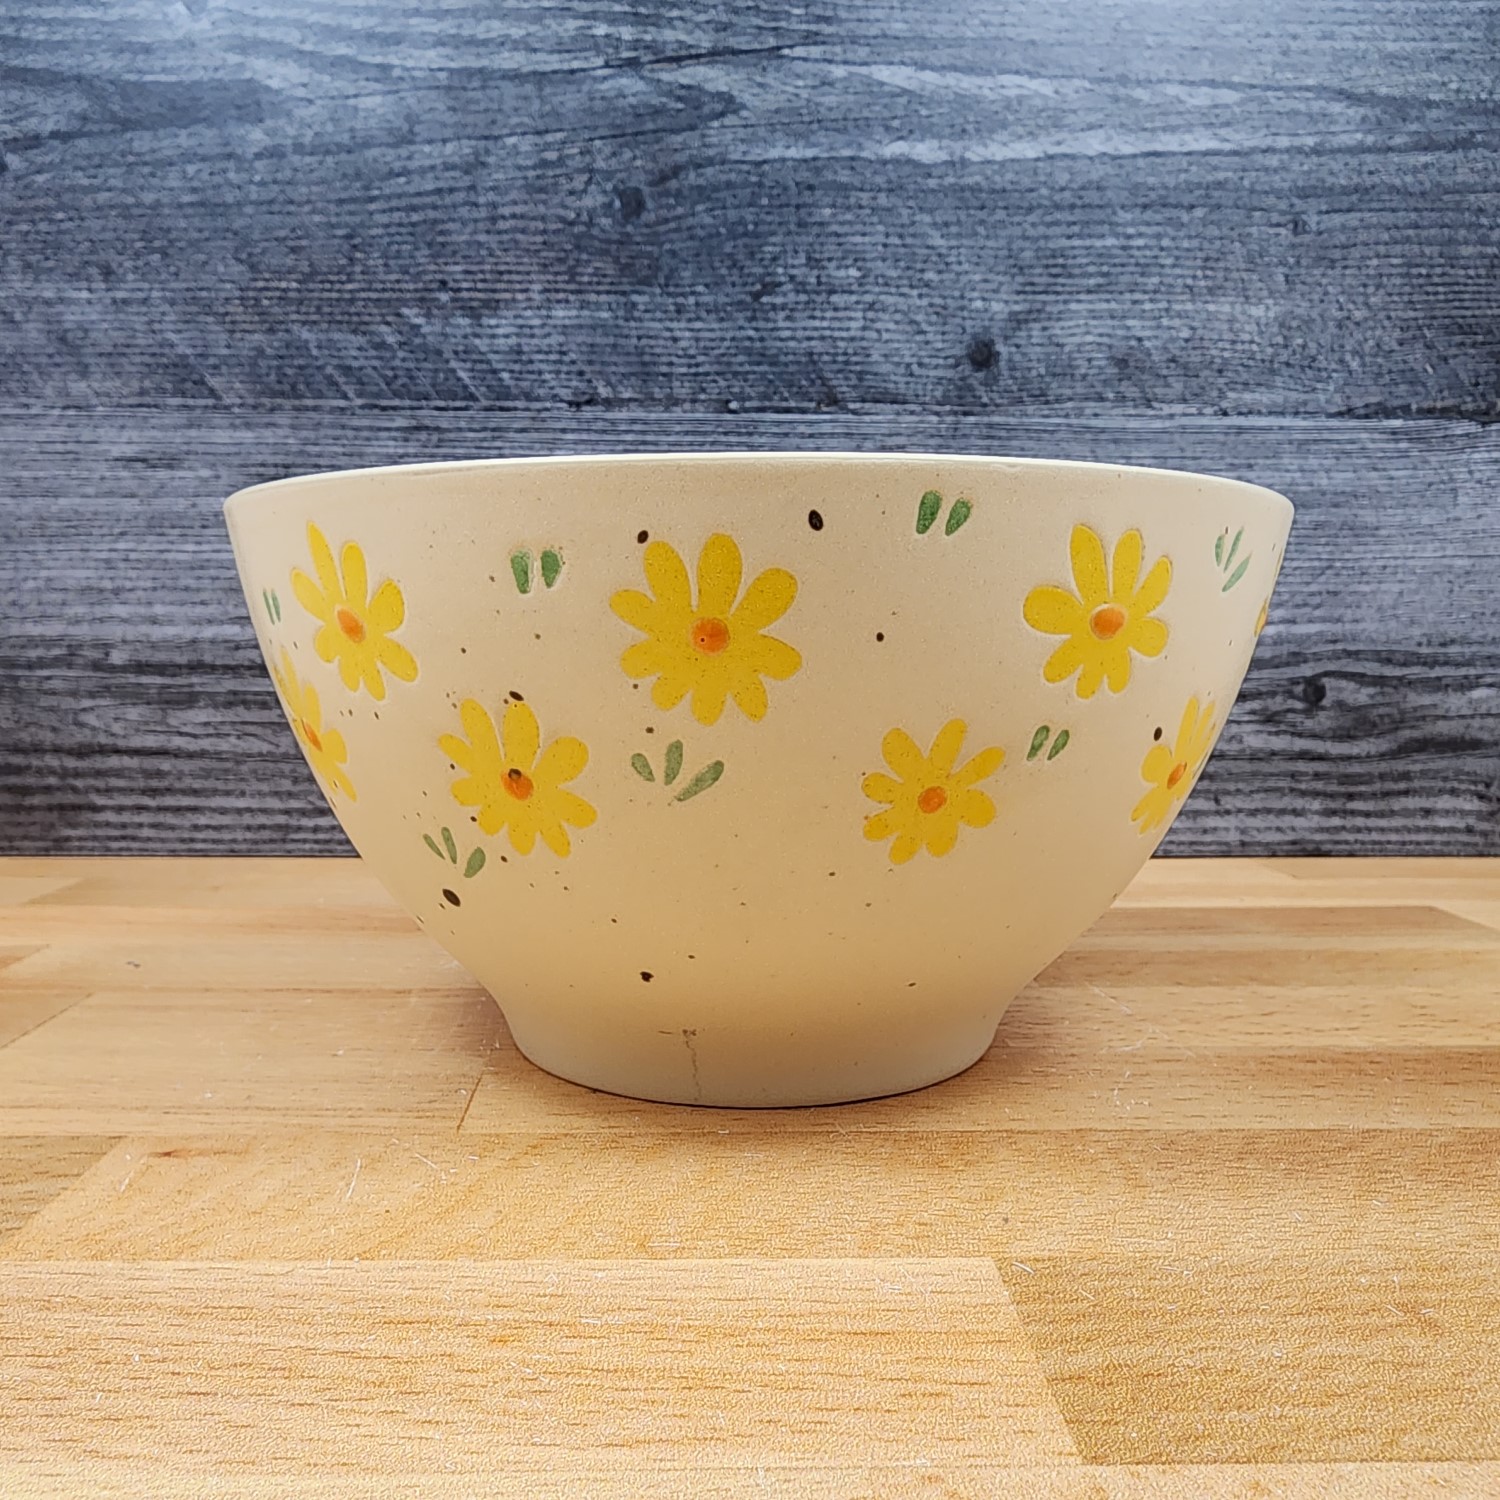 This Daisy Flowers Festive Bowl 6 inch (15cm) Floral Dish by Blue Sky is made with love by Premier Homegoods! Shop more unique gift ideas today with Spots Initiatives, the best way to support creators.